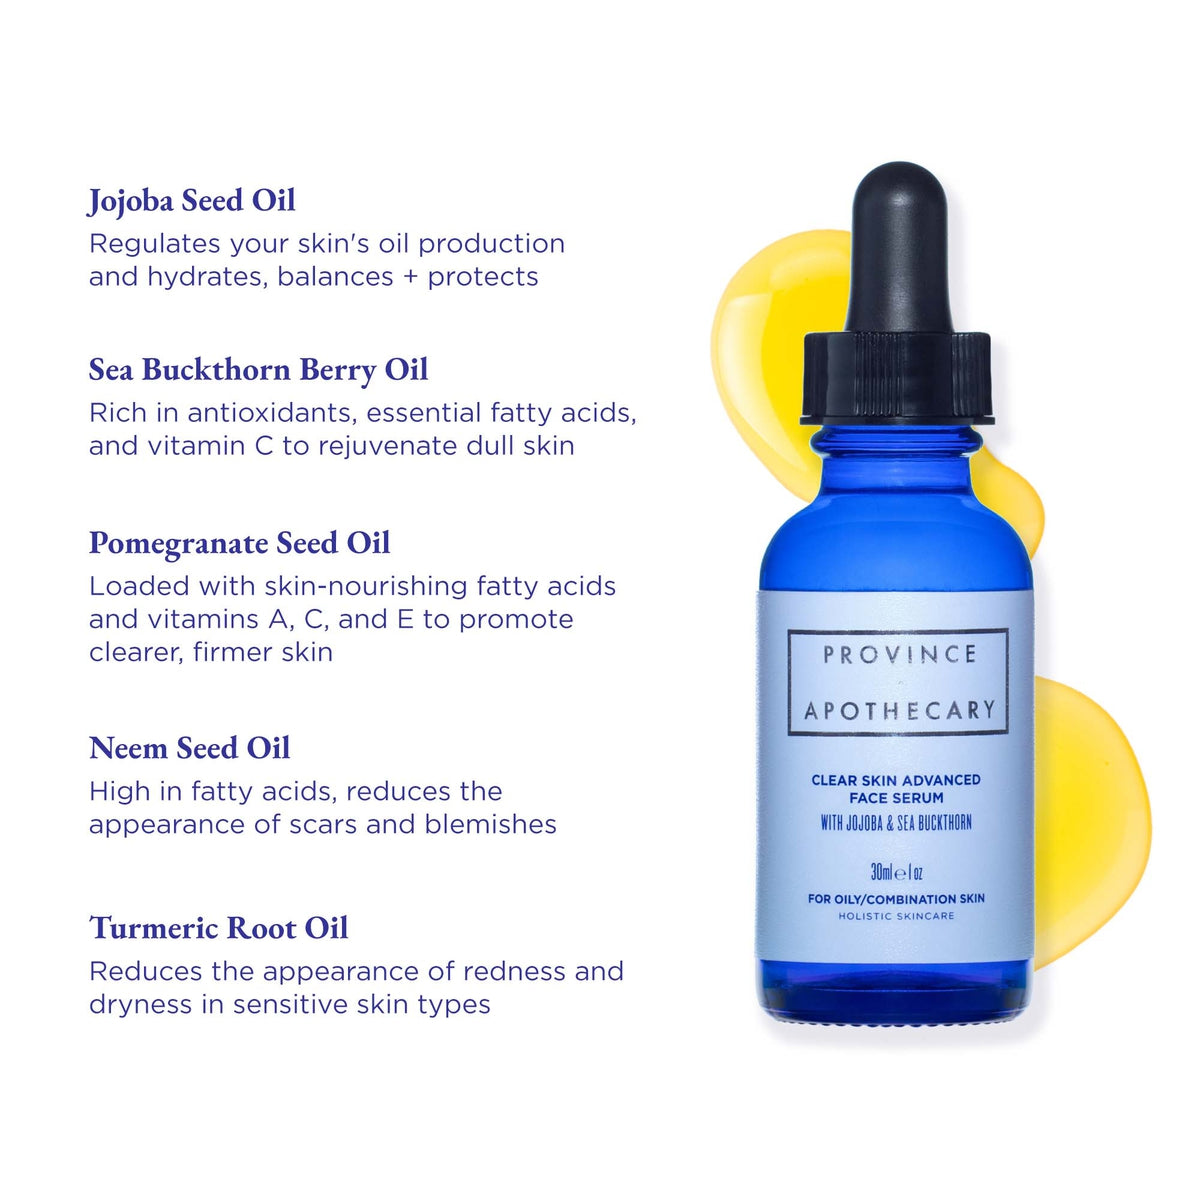 Province Apothecary Clear Skin Advanced Face Serum | The Detox Market